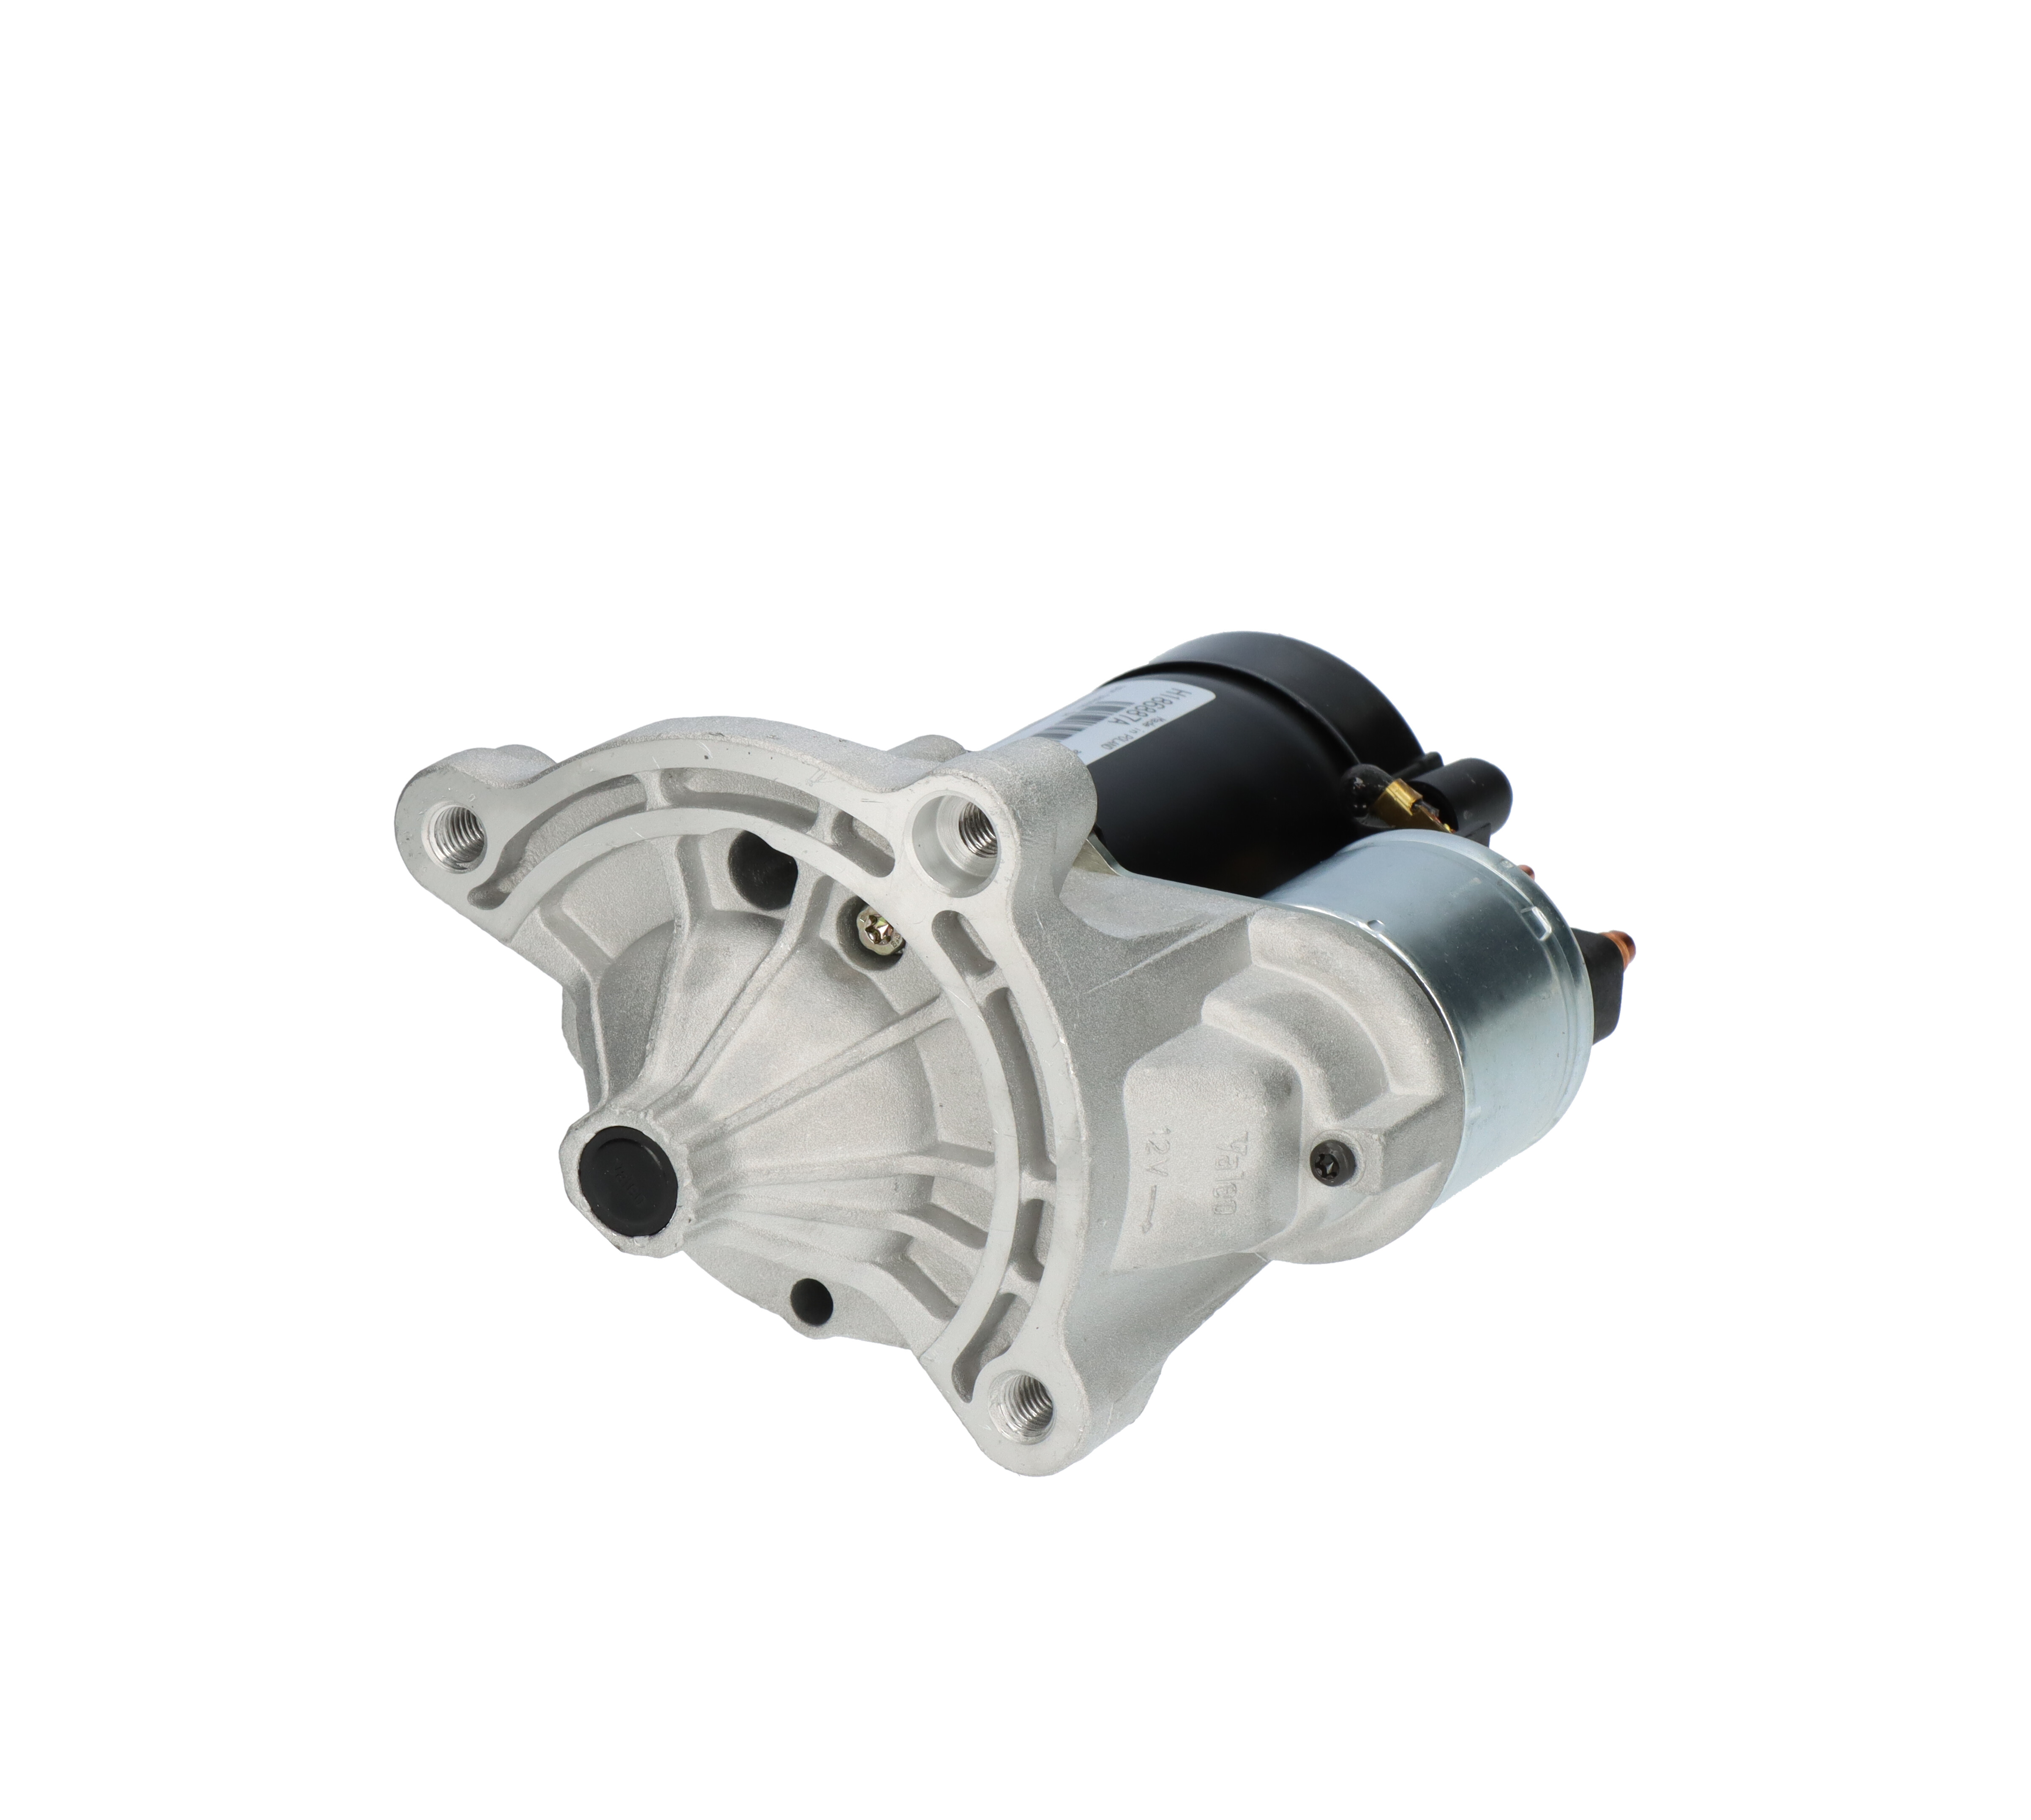 VALEO 432636 Starter motor PEUGEOT experience and price